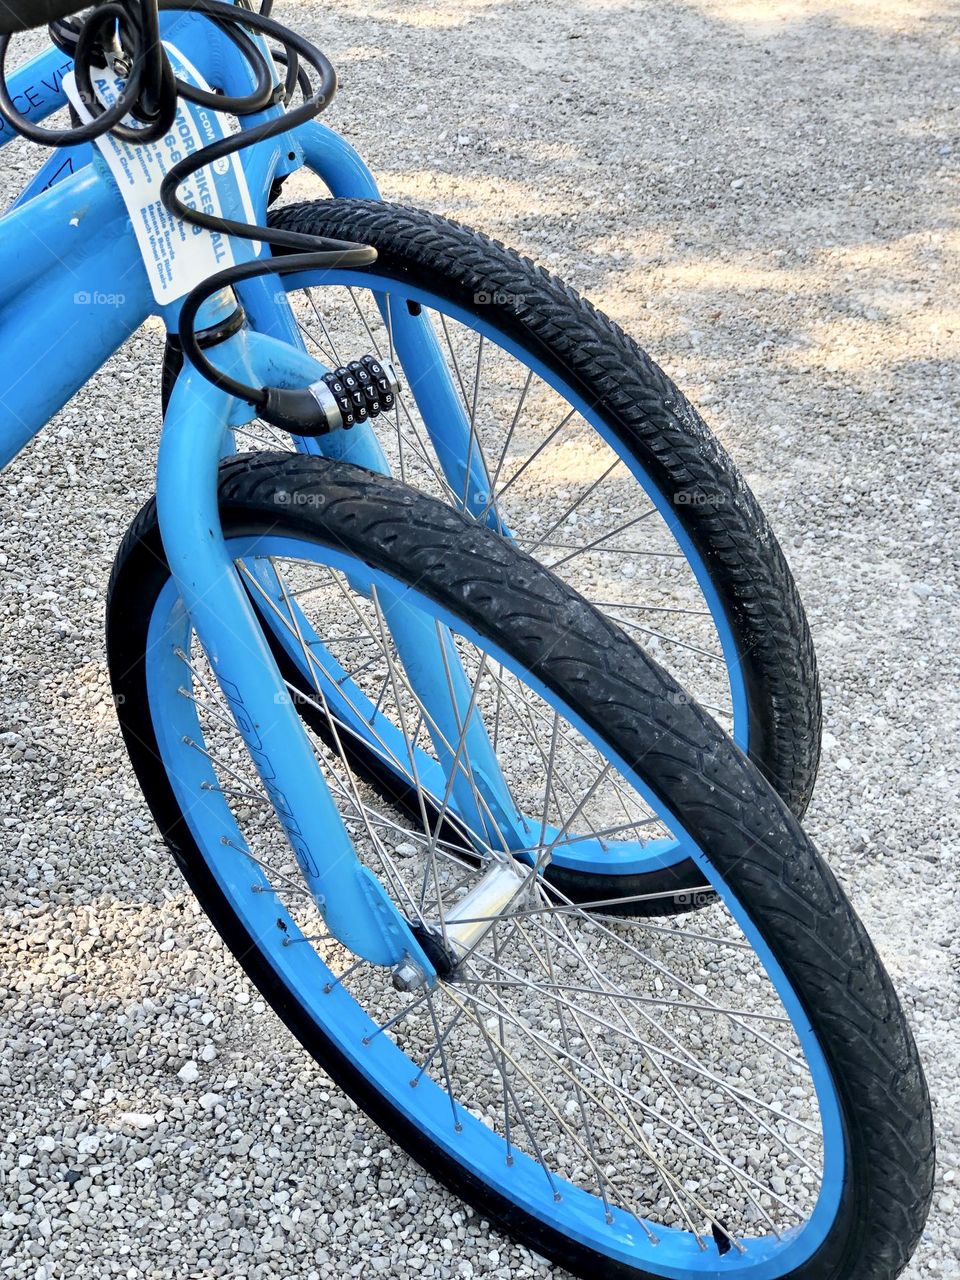 Closeup of front tires of parked blue rental bikes. A combination lock hangs from the handlebars 